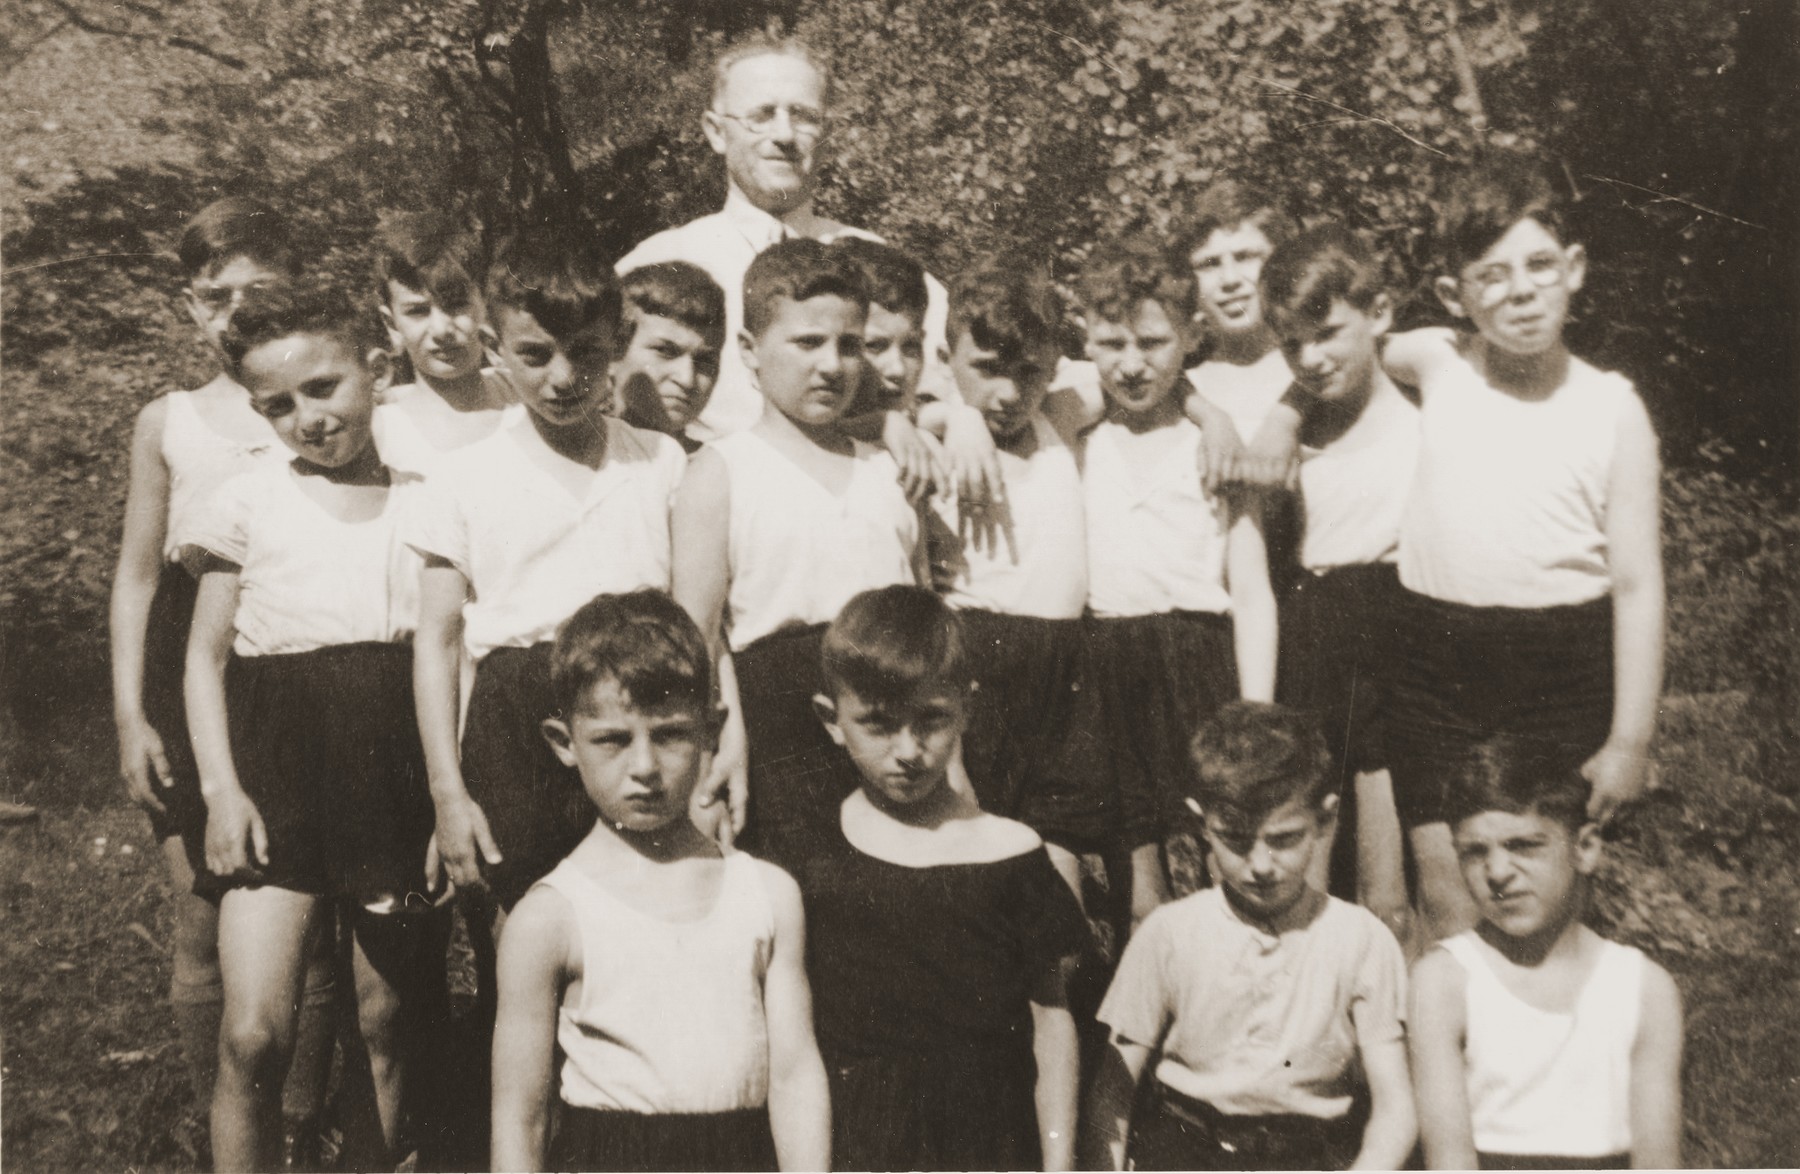 Group portrait of Jewish children who are members of the Hakoach sports club in Essen.  

Among those pictured is Heinz Straus (back row, second from the left).